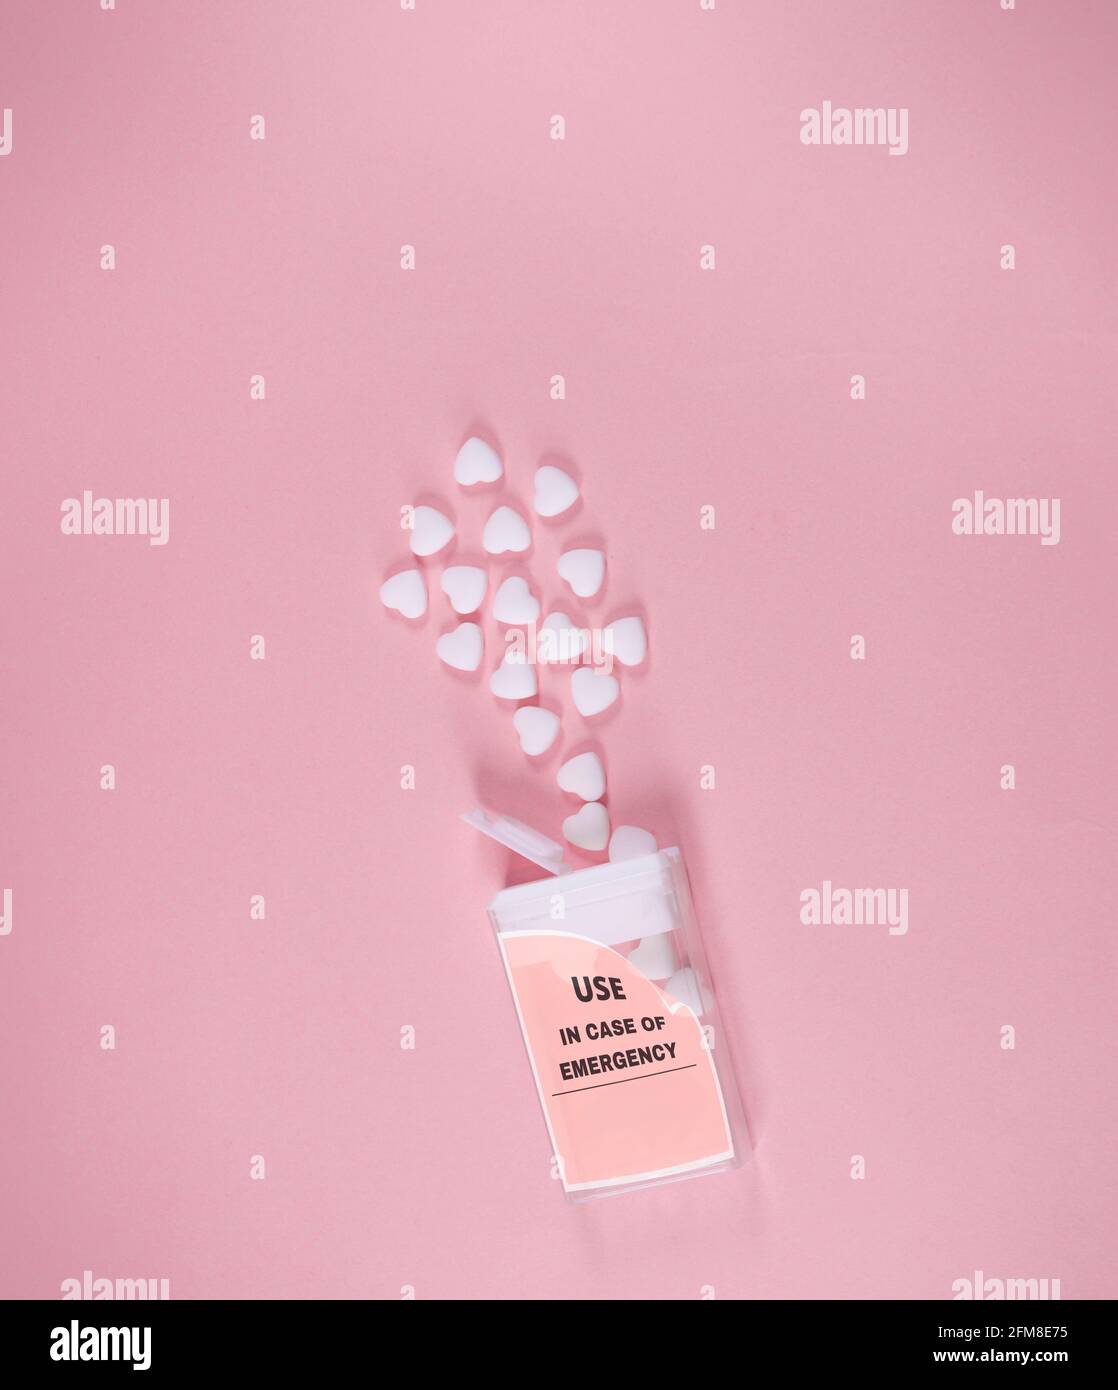 Box with use in emergency writing. Small white hearts coming out. On soft pink background. Minimal abstract Valentines, Mother's day concept. Stock Photo